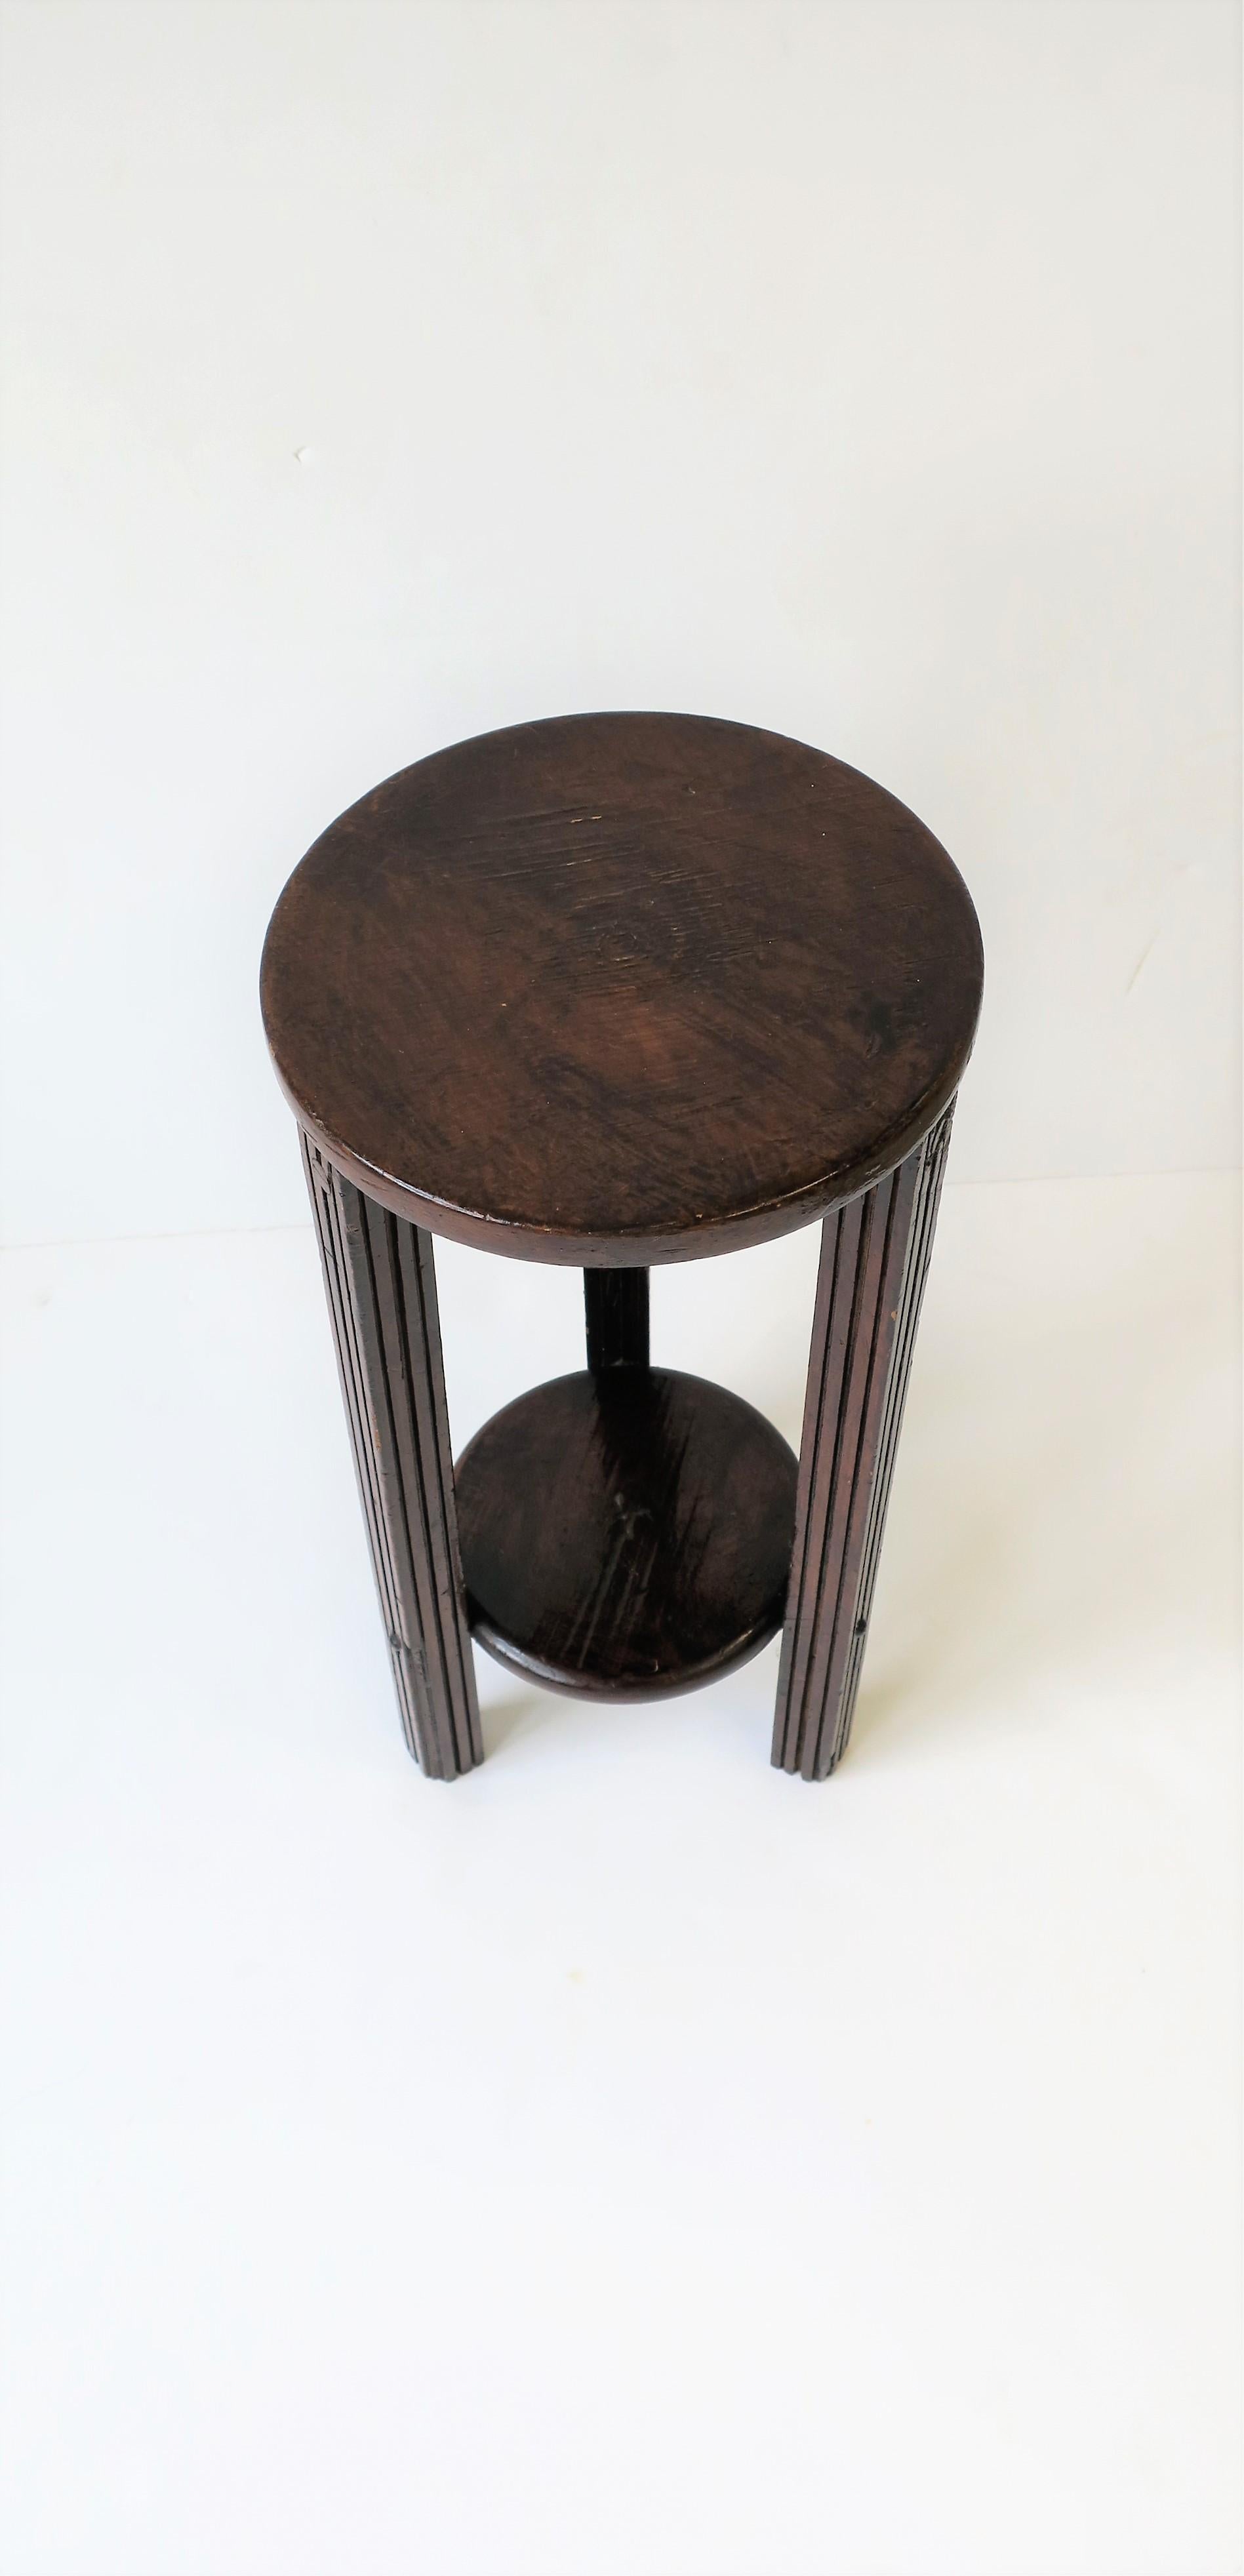 Varnished Art Deco Period Round Side or Drinks Table 